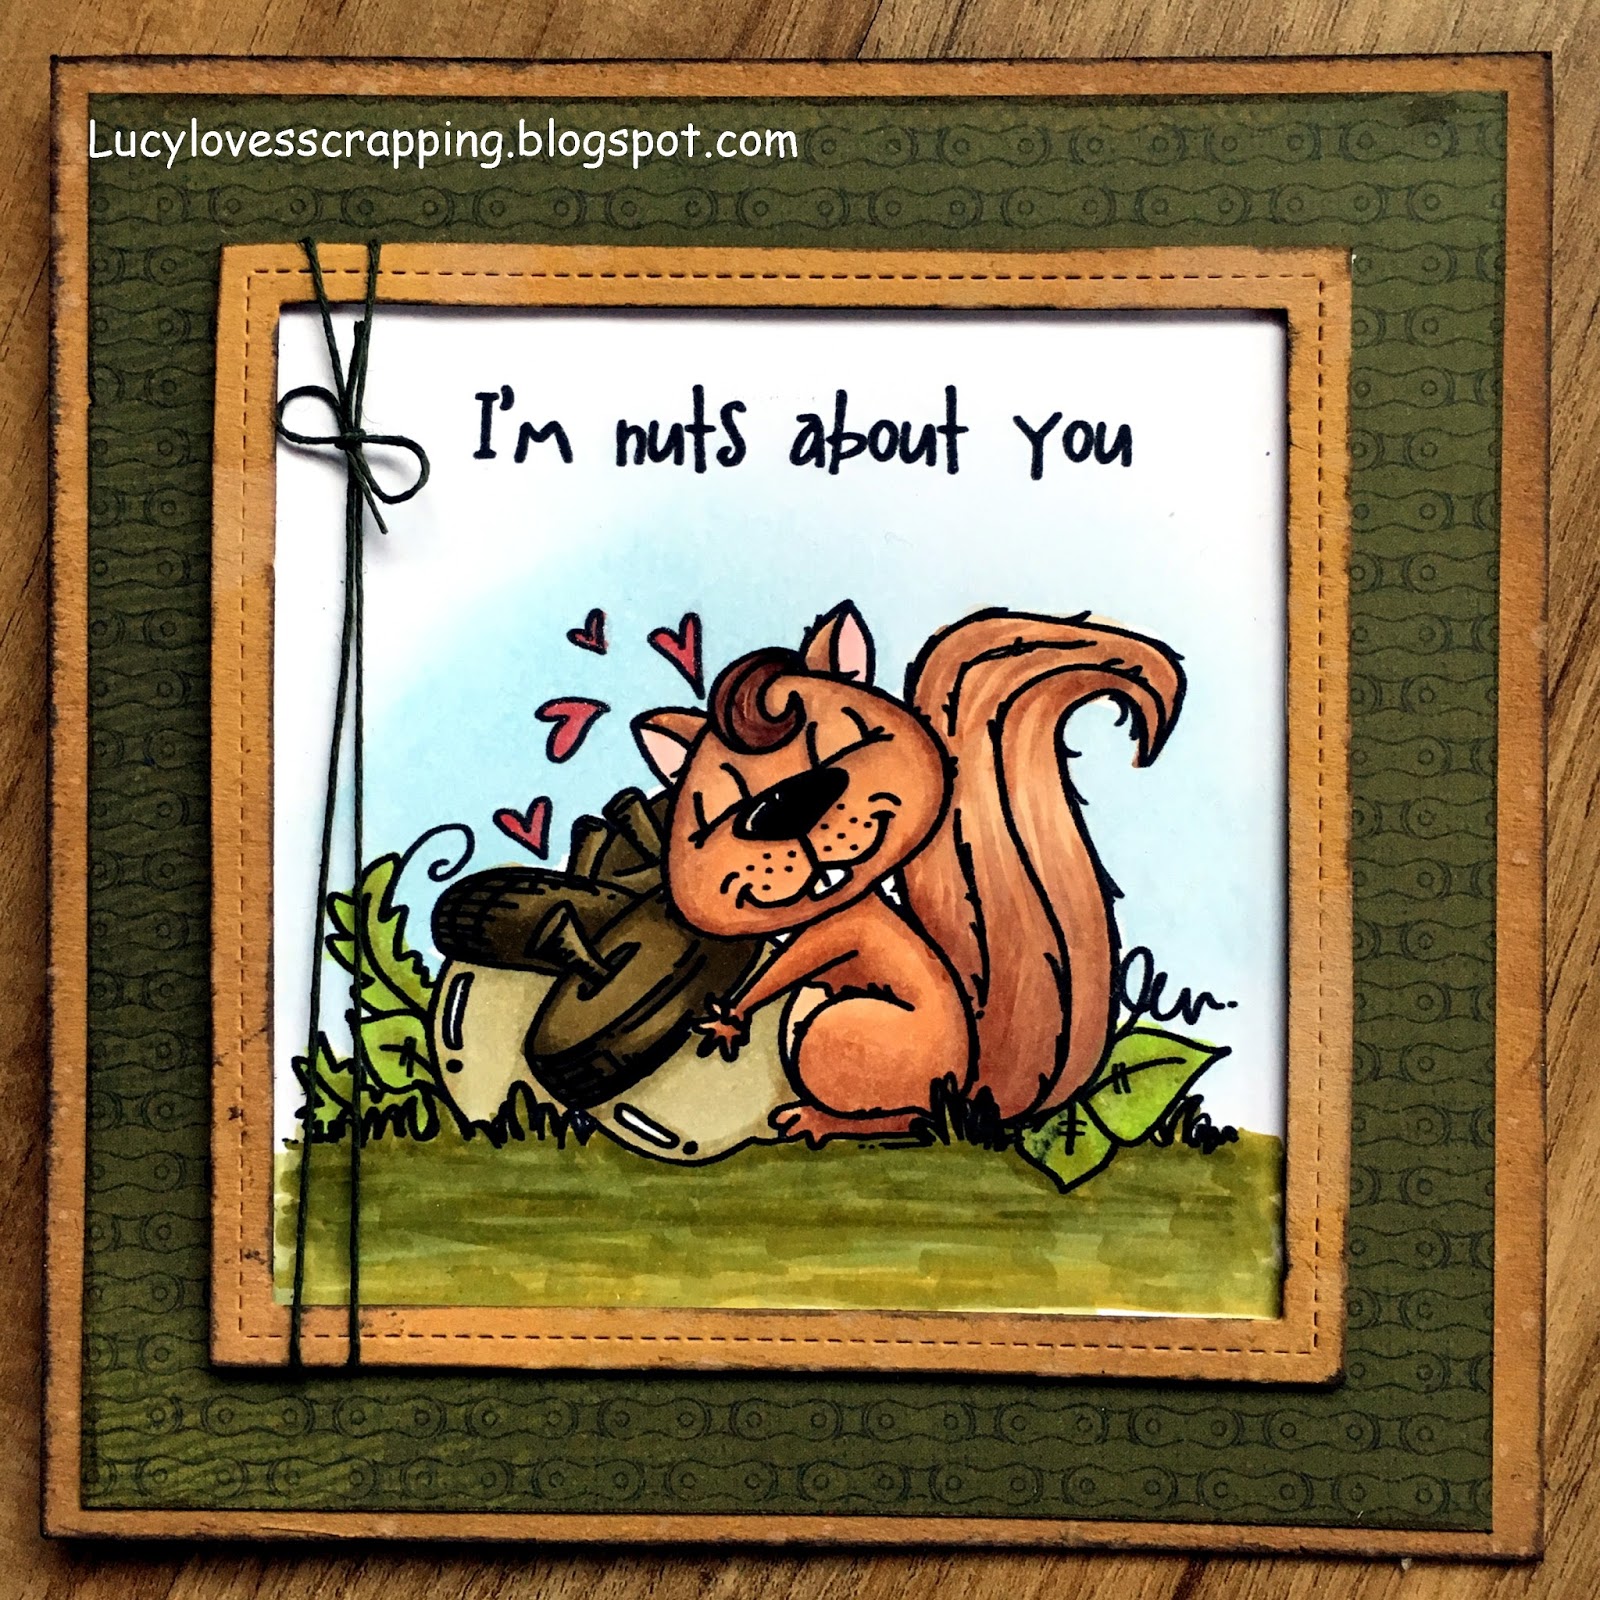 Lucy loves scrapping: I'm Nuts About You card (Bugaboo image)